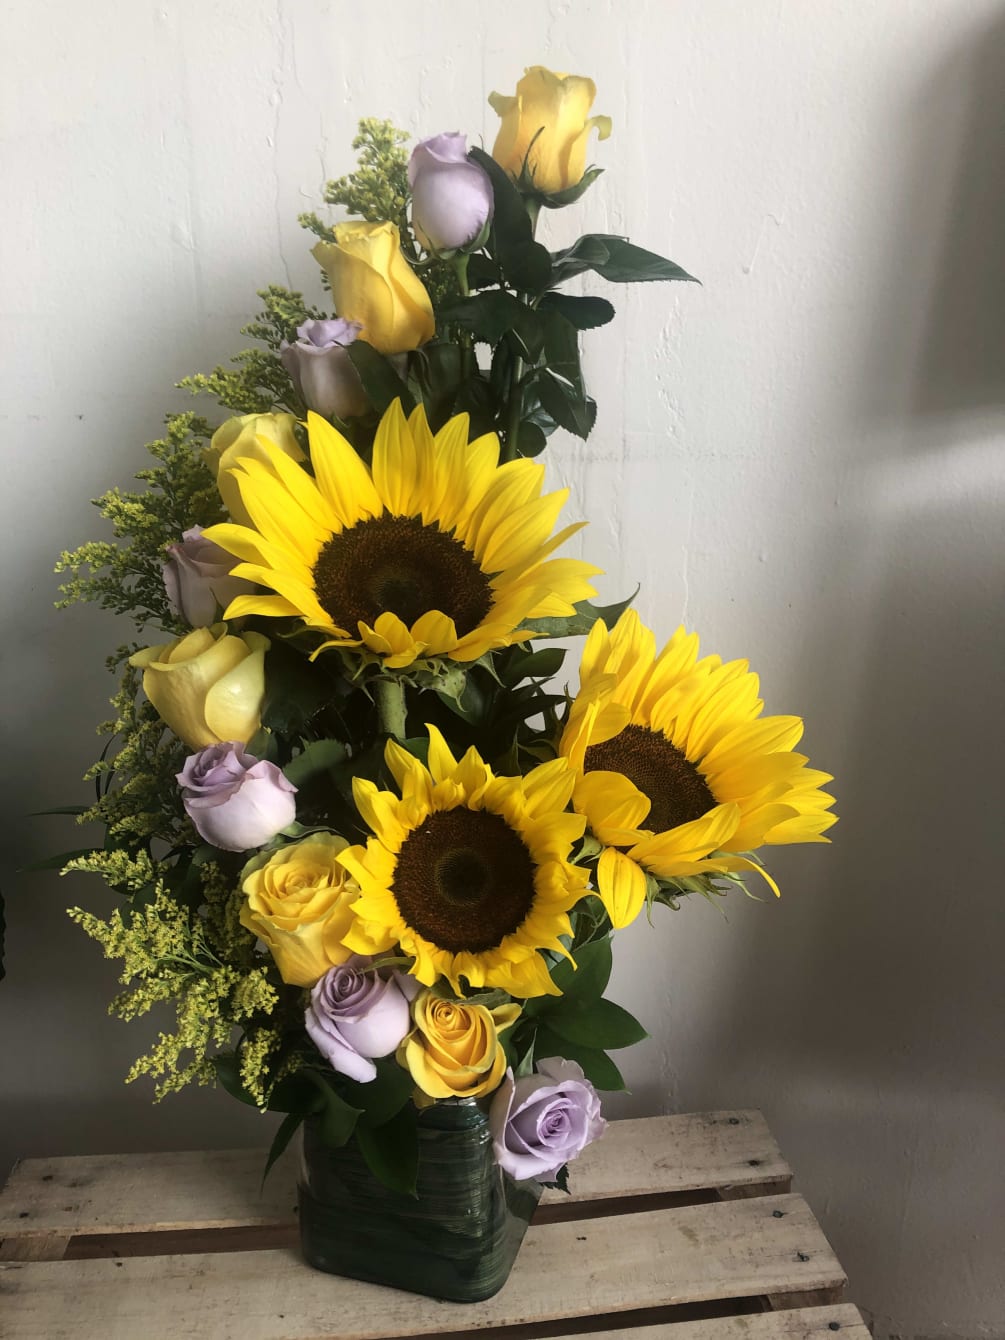 Combination of yellow and purple roses with three sunflowers in the Middle